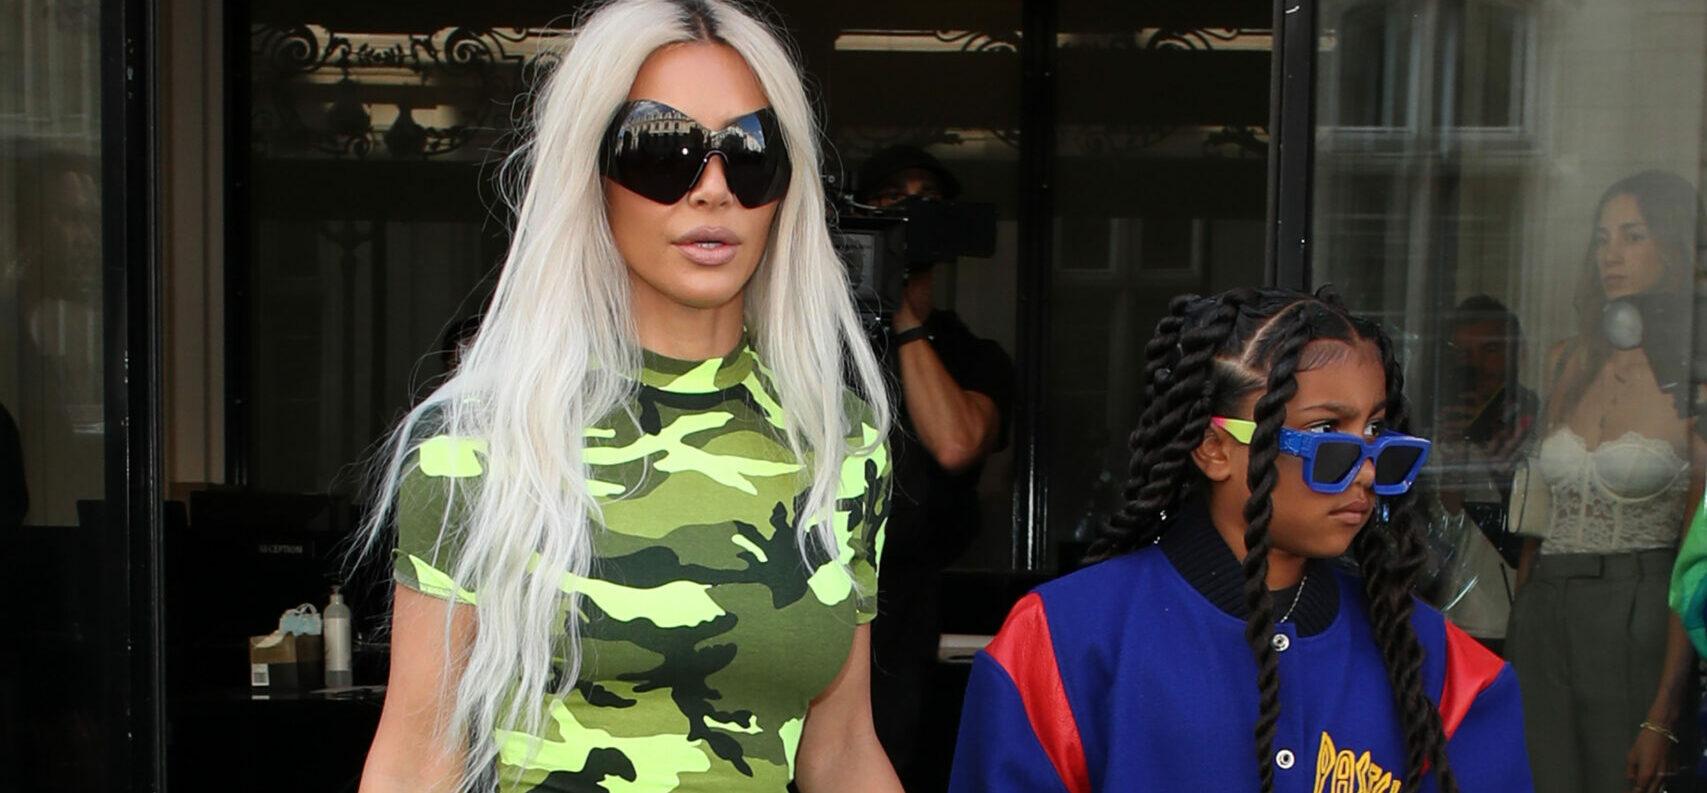 North West Is The Sole Owner Of This One-Of-A-Kind Karl Purse